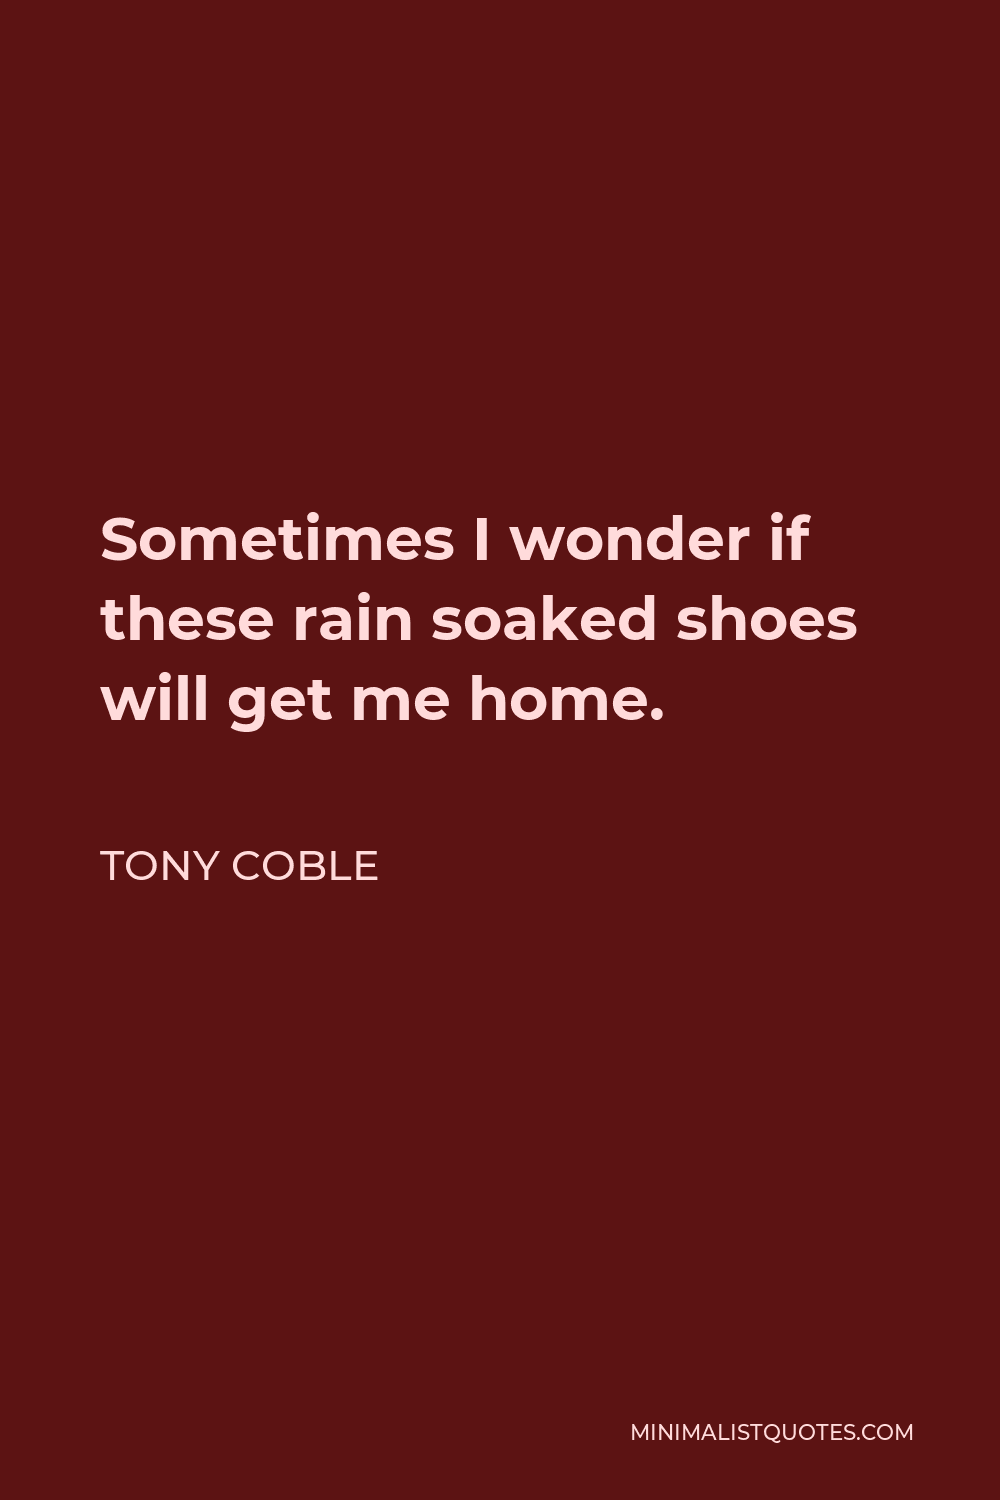 Tony Coble Quote - Sometimes I wonder if these rain soaked shoes will get me home.